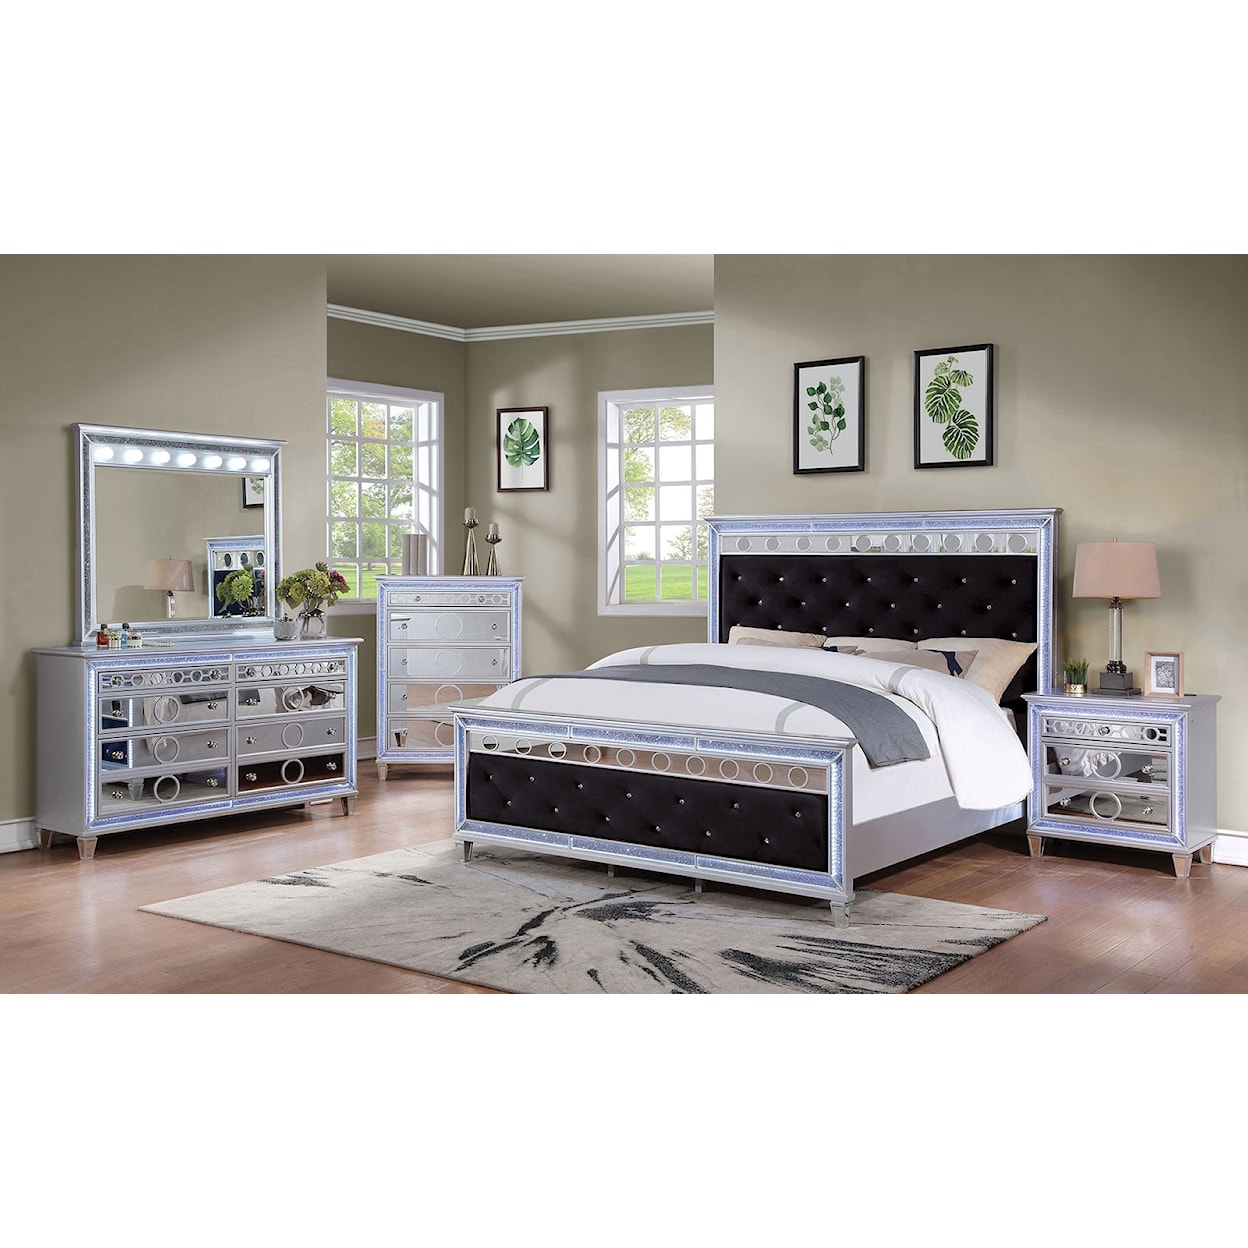 Furniture of America Mairead Upholstered King Bed with LED Lighting